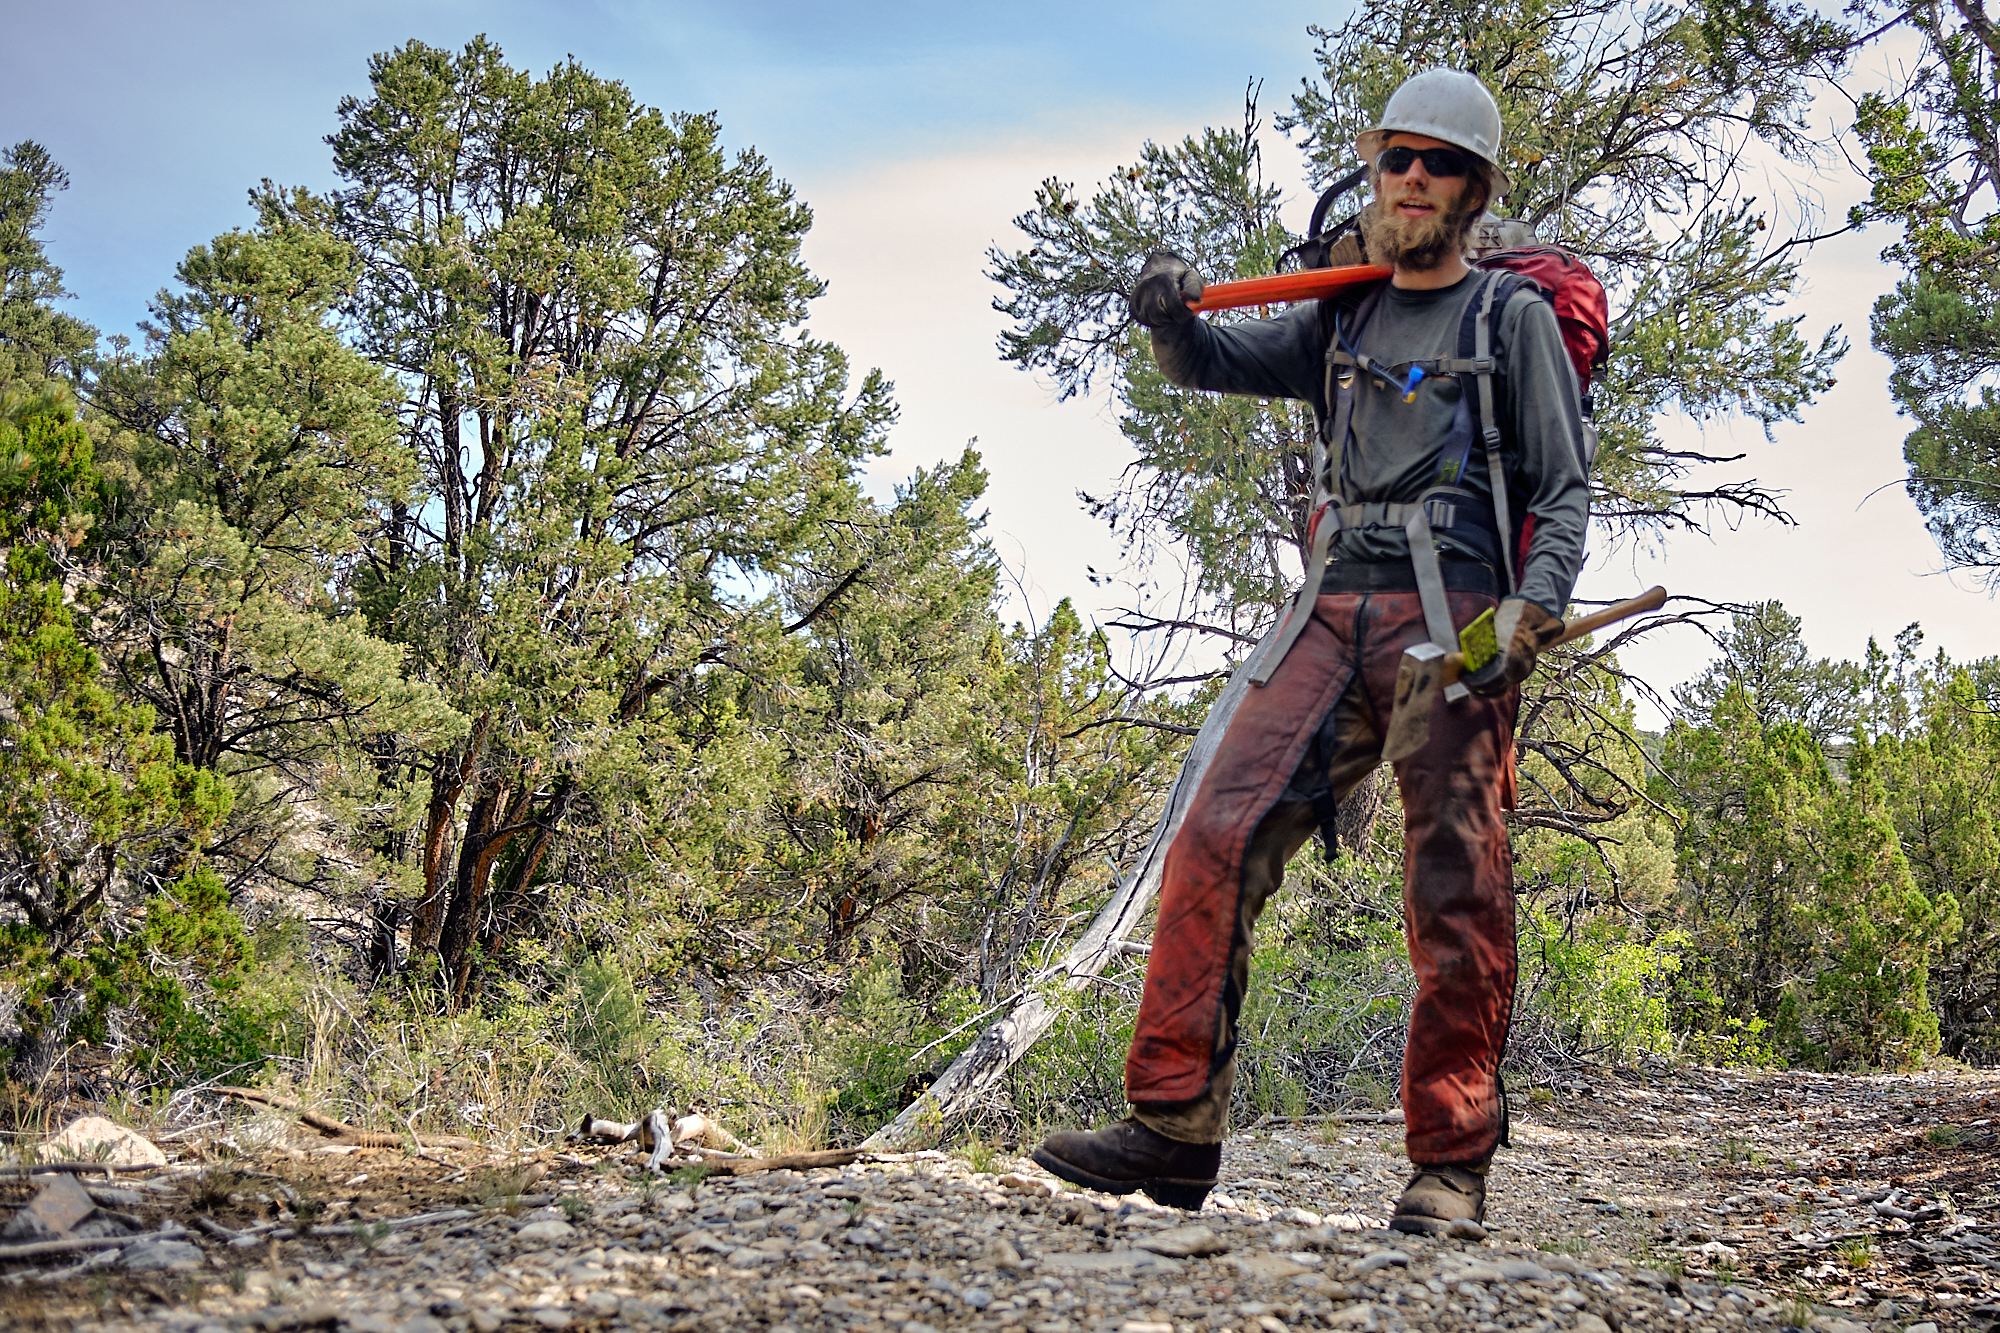  Myself in all of my saw gear while working on some trail maintenance in Big Wash. | Great Basin National Park 7/20/18 